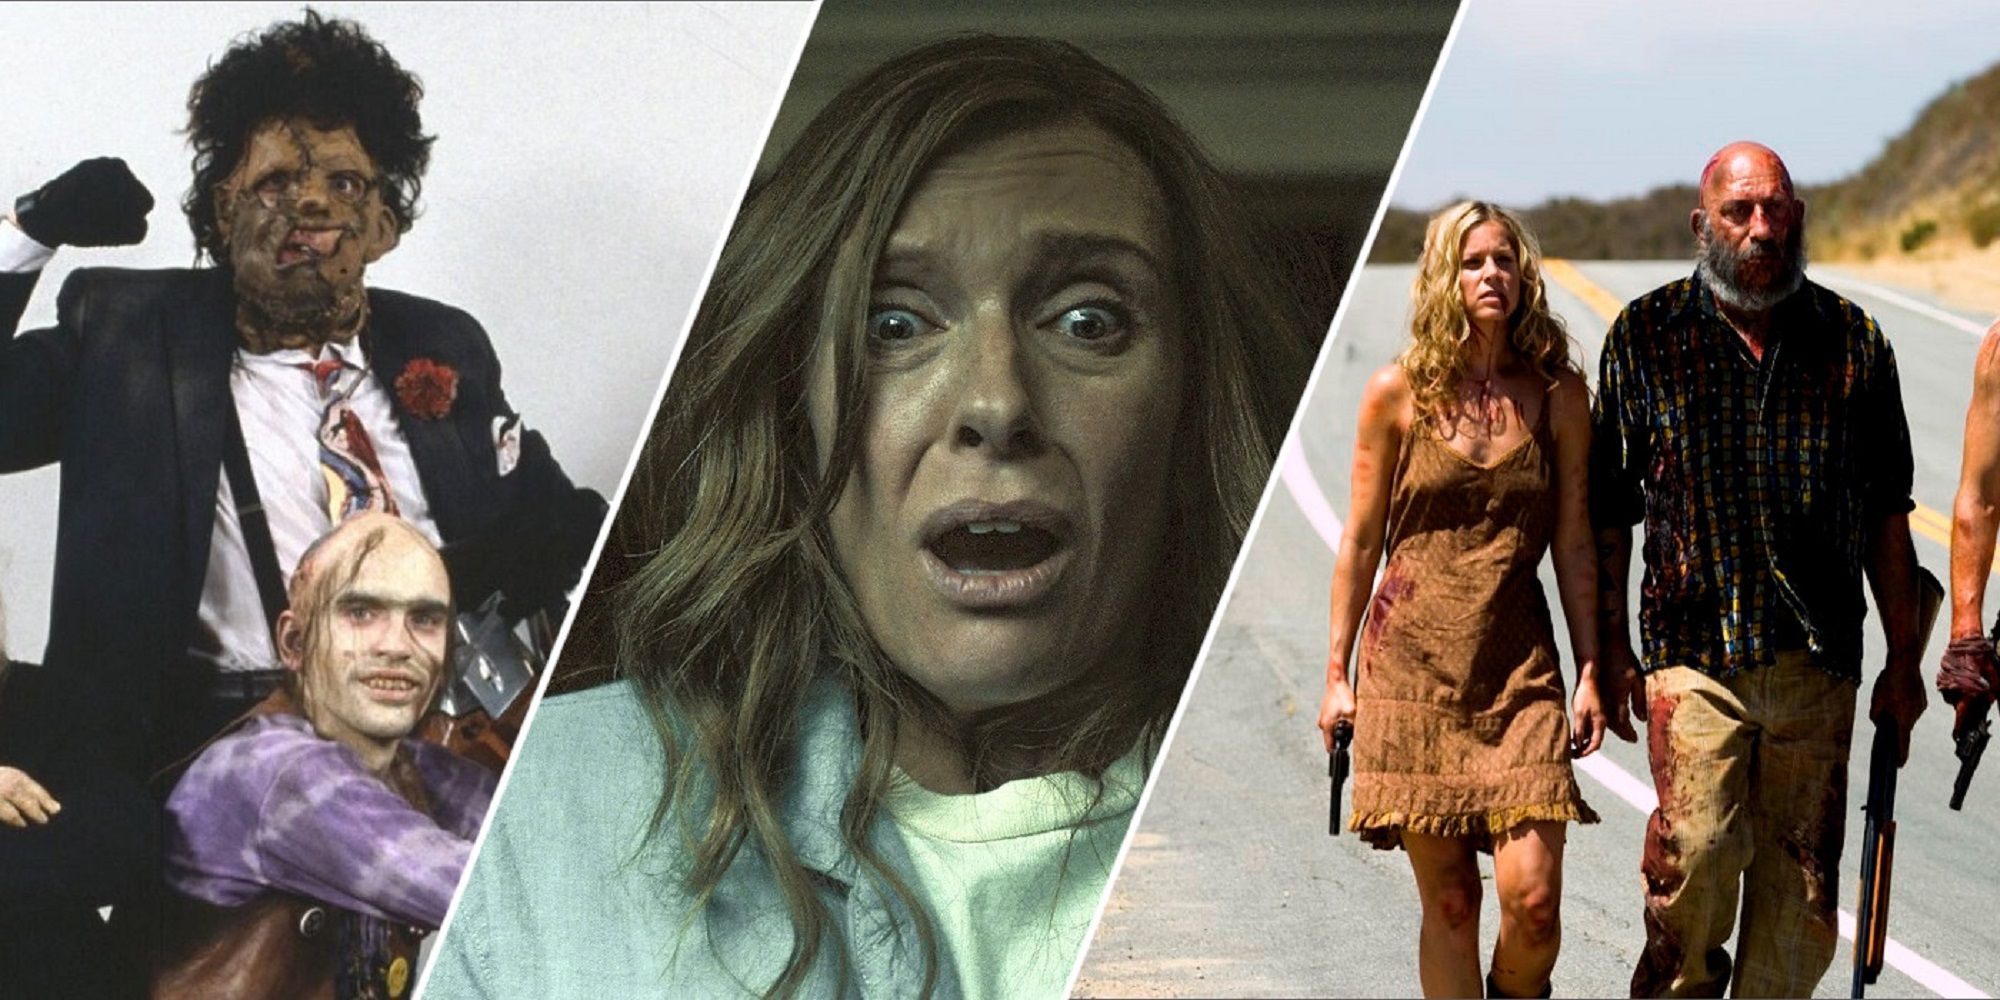 Leatherface and the Sawyer Family in 'The Texas Chain Saw Massacre,' Annie looking terrified in 'Hereditary,' and the Firefly family walking down a street.